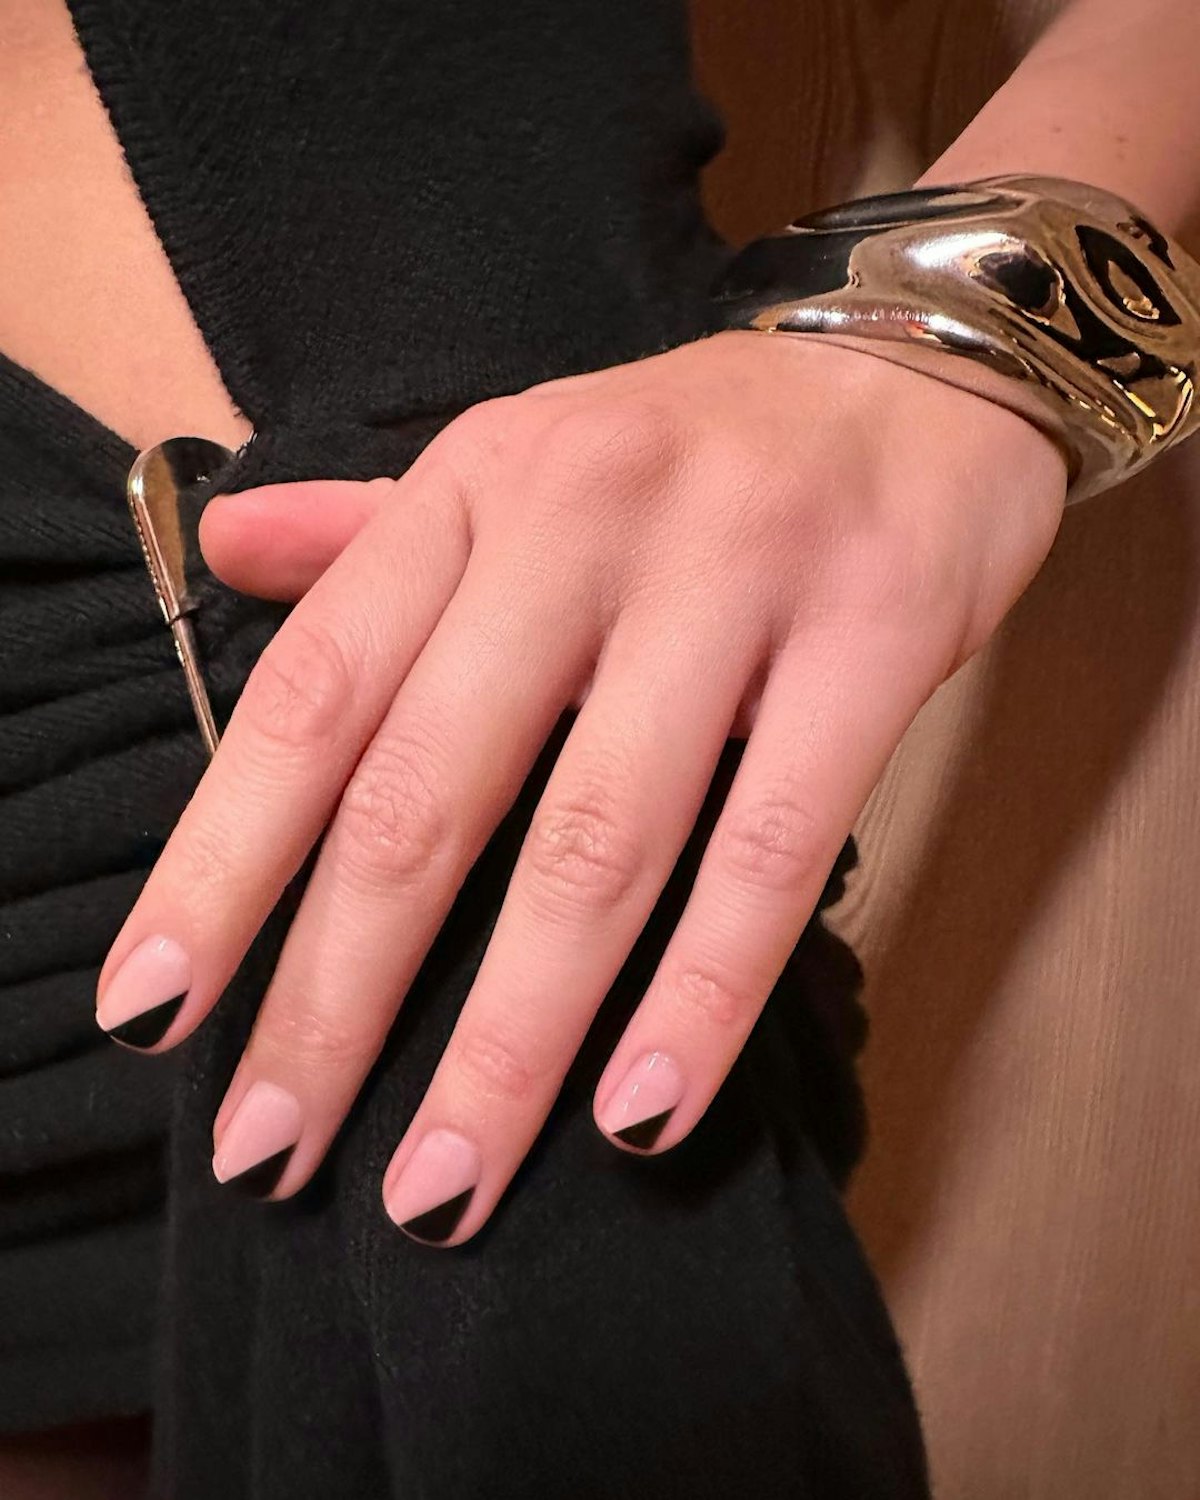 Try abstract black French tips on your nails for Capricorn season.